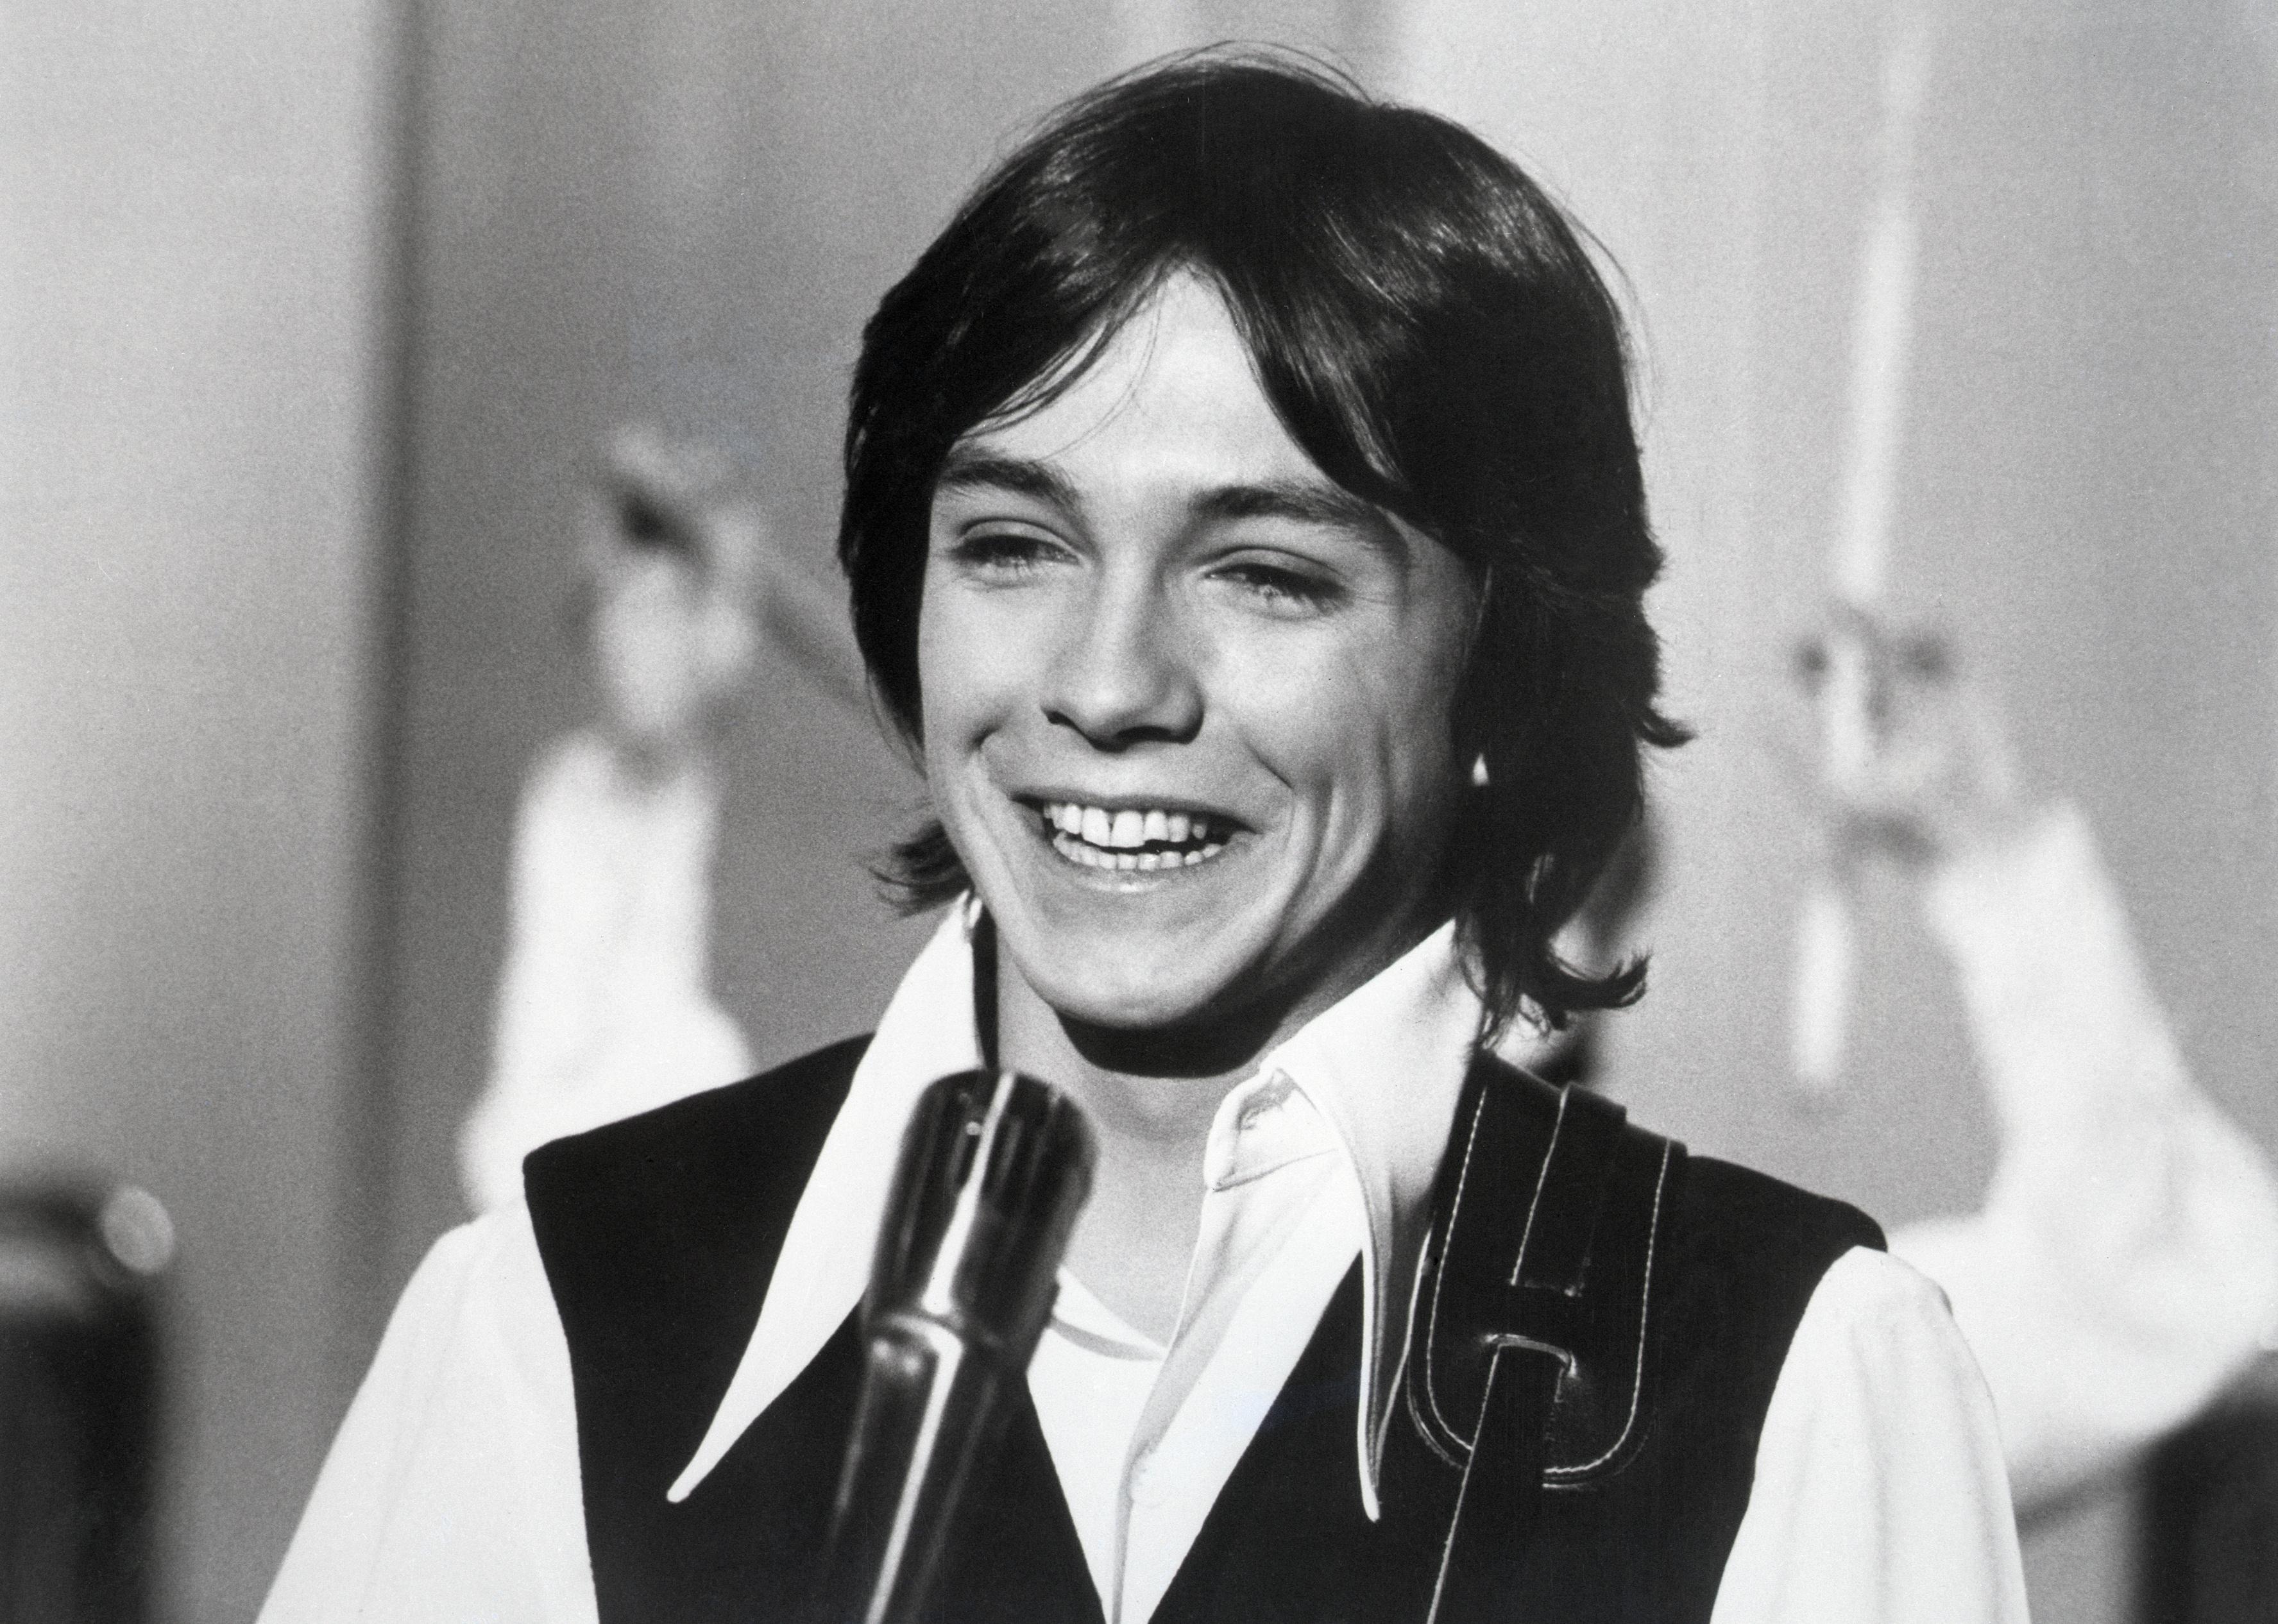 David Cassidy is seen in closeup, candidly smiling.